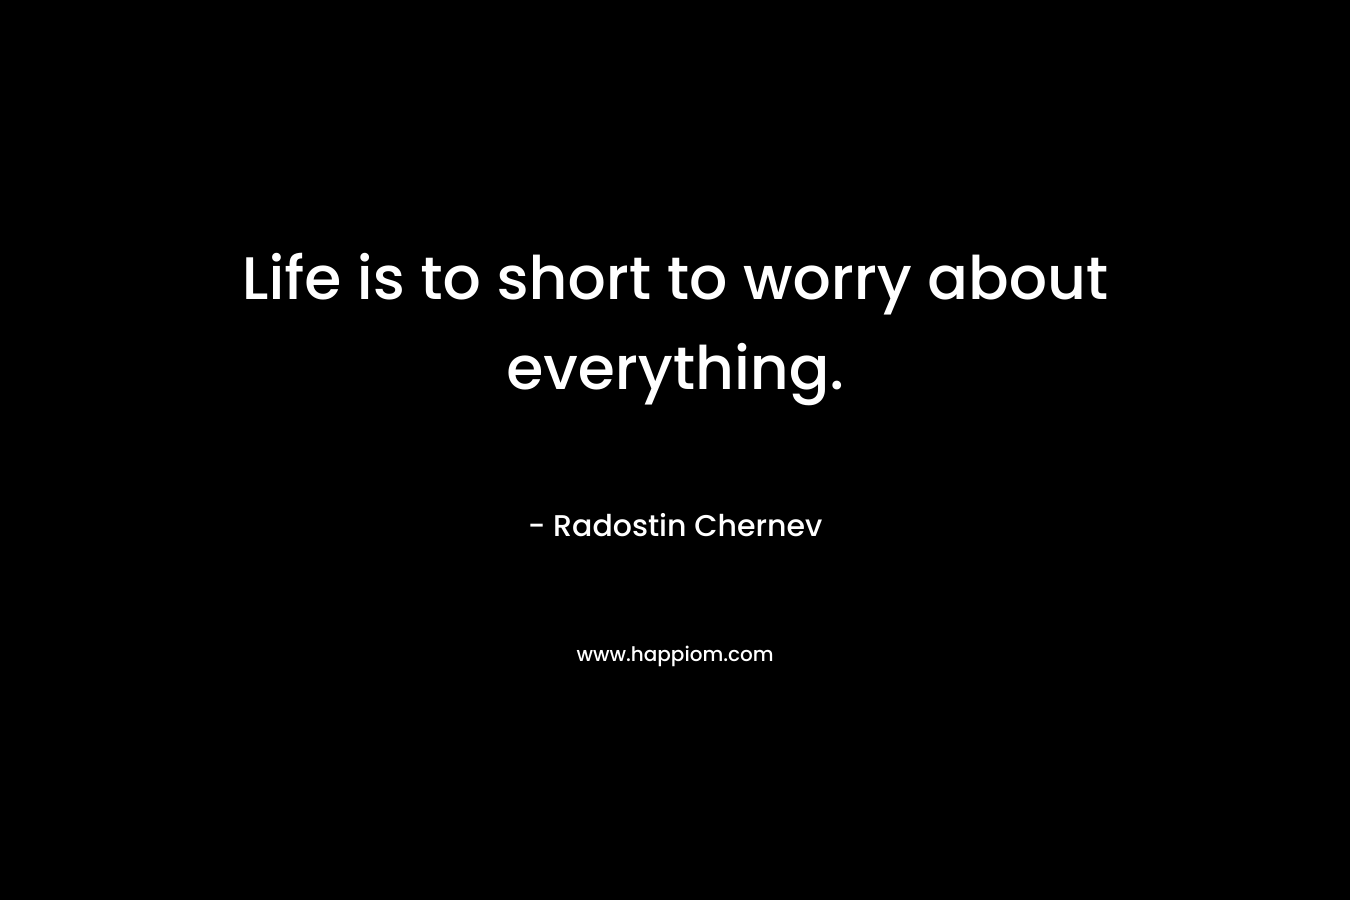 Life is to short to worry about everything.